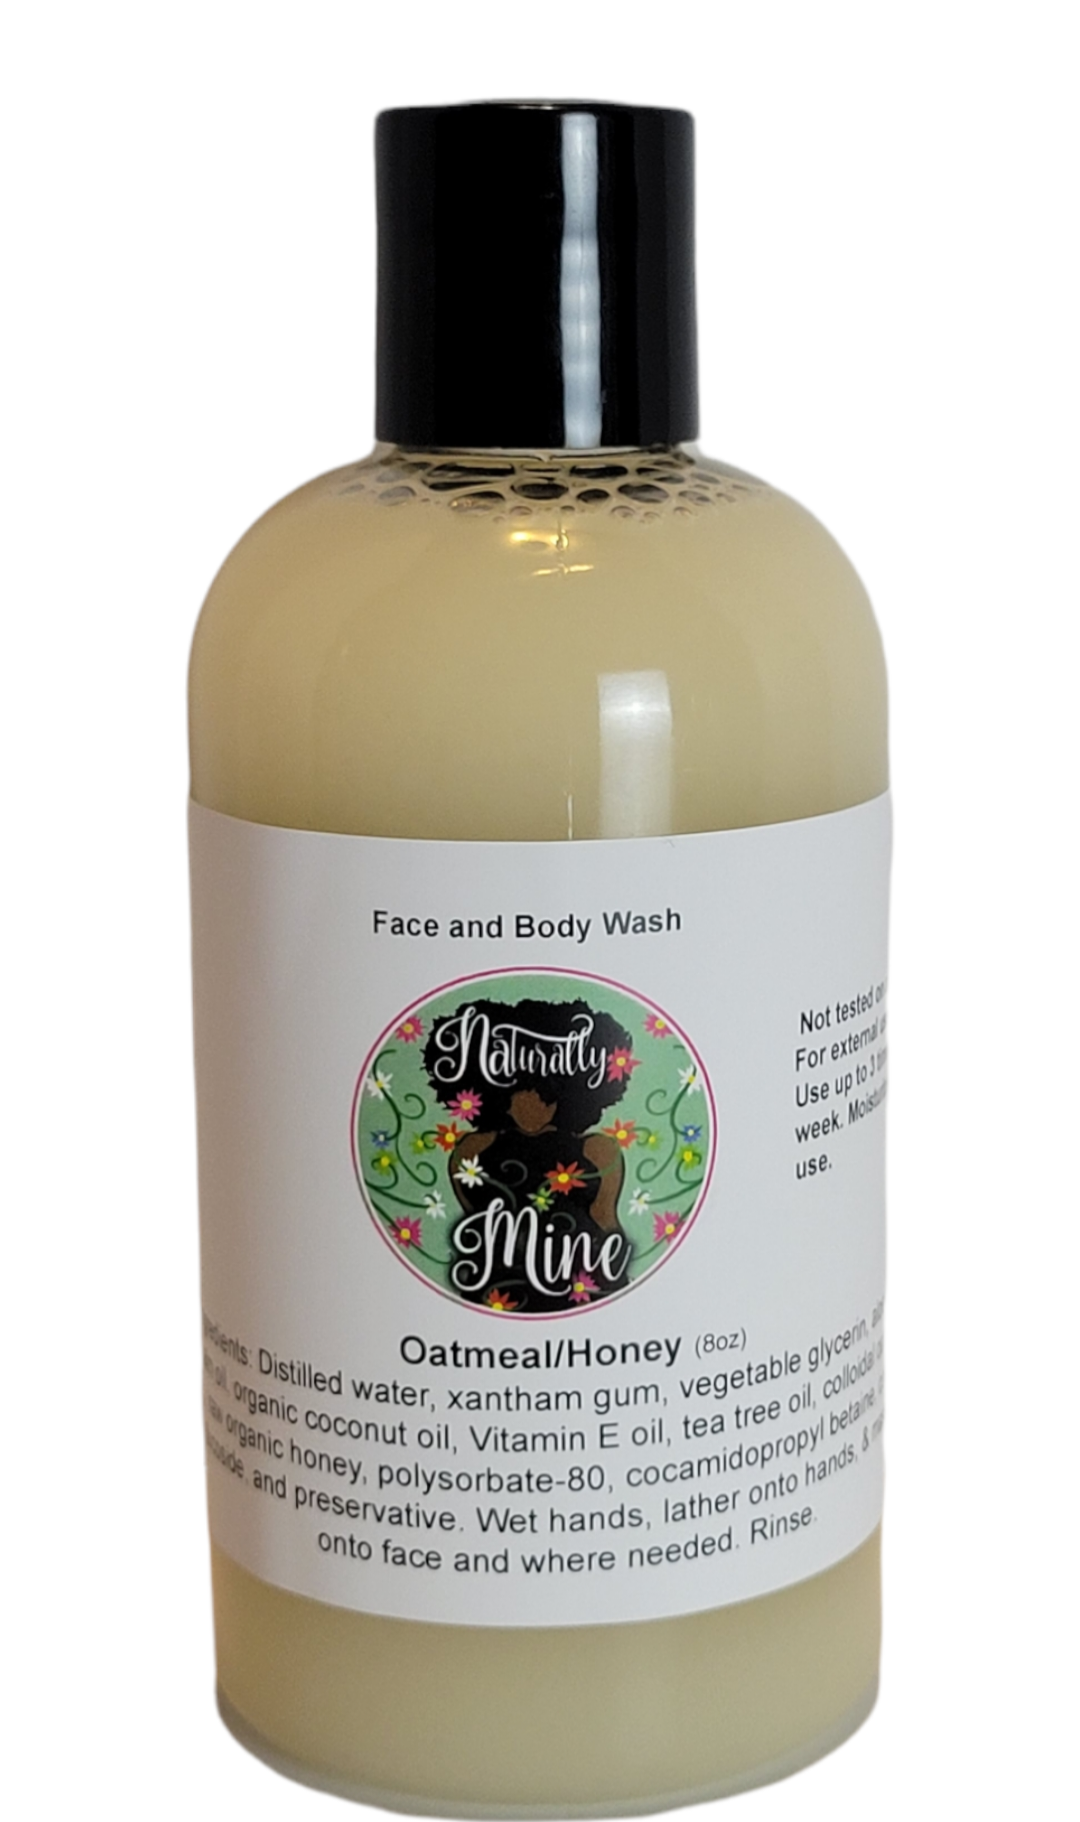 Oatmeal/Honey Face and Body Wash